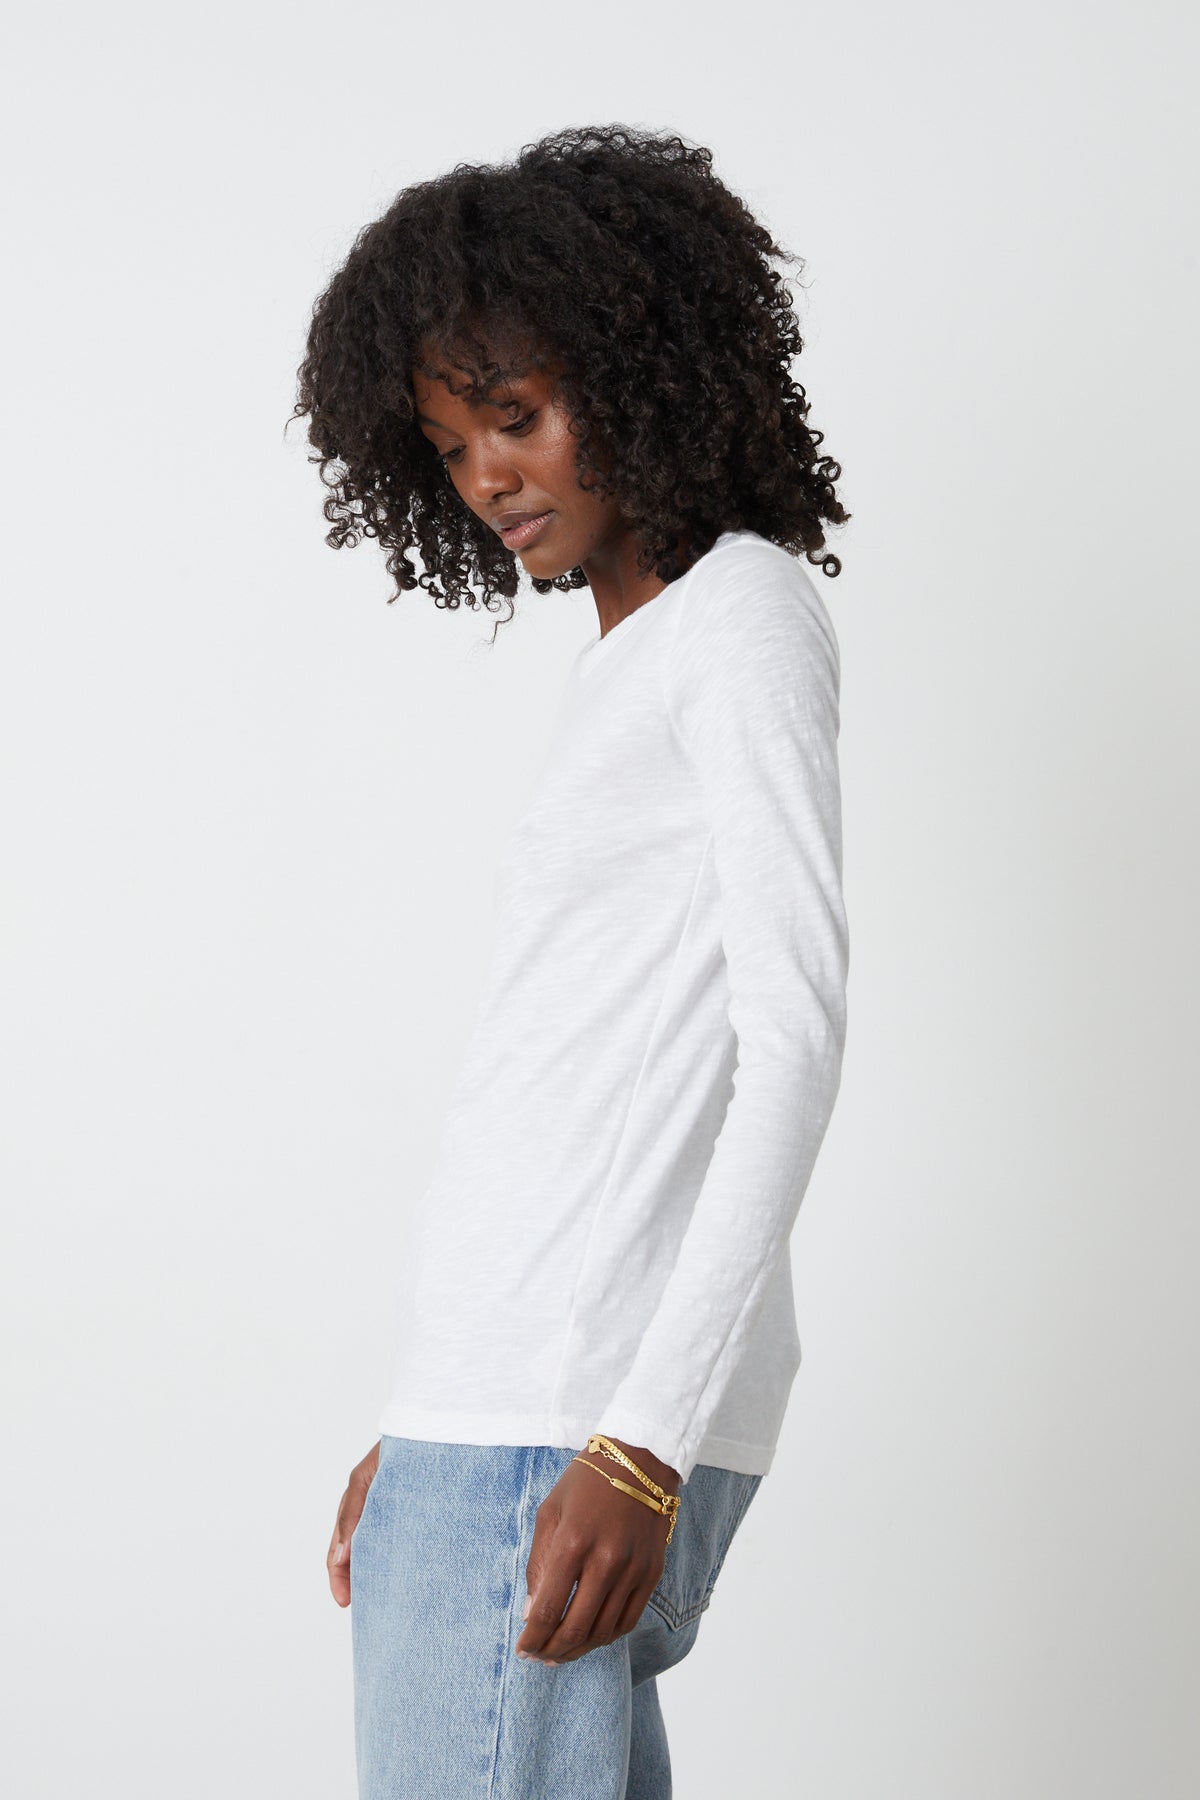   The model is wearing a white Lizzie Original Slub Long Sleeve Tee by Velvet by Graham & Spencer and jeans. 